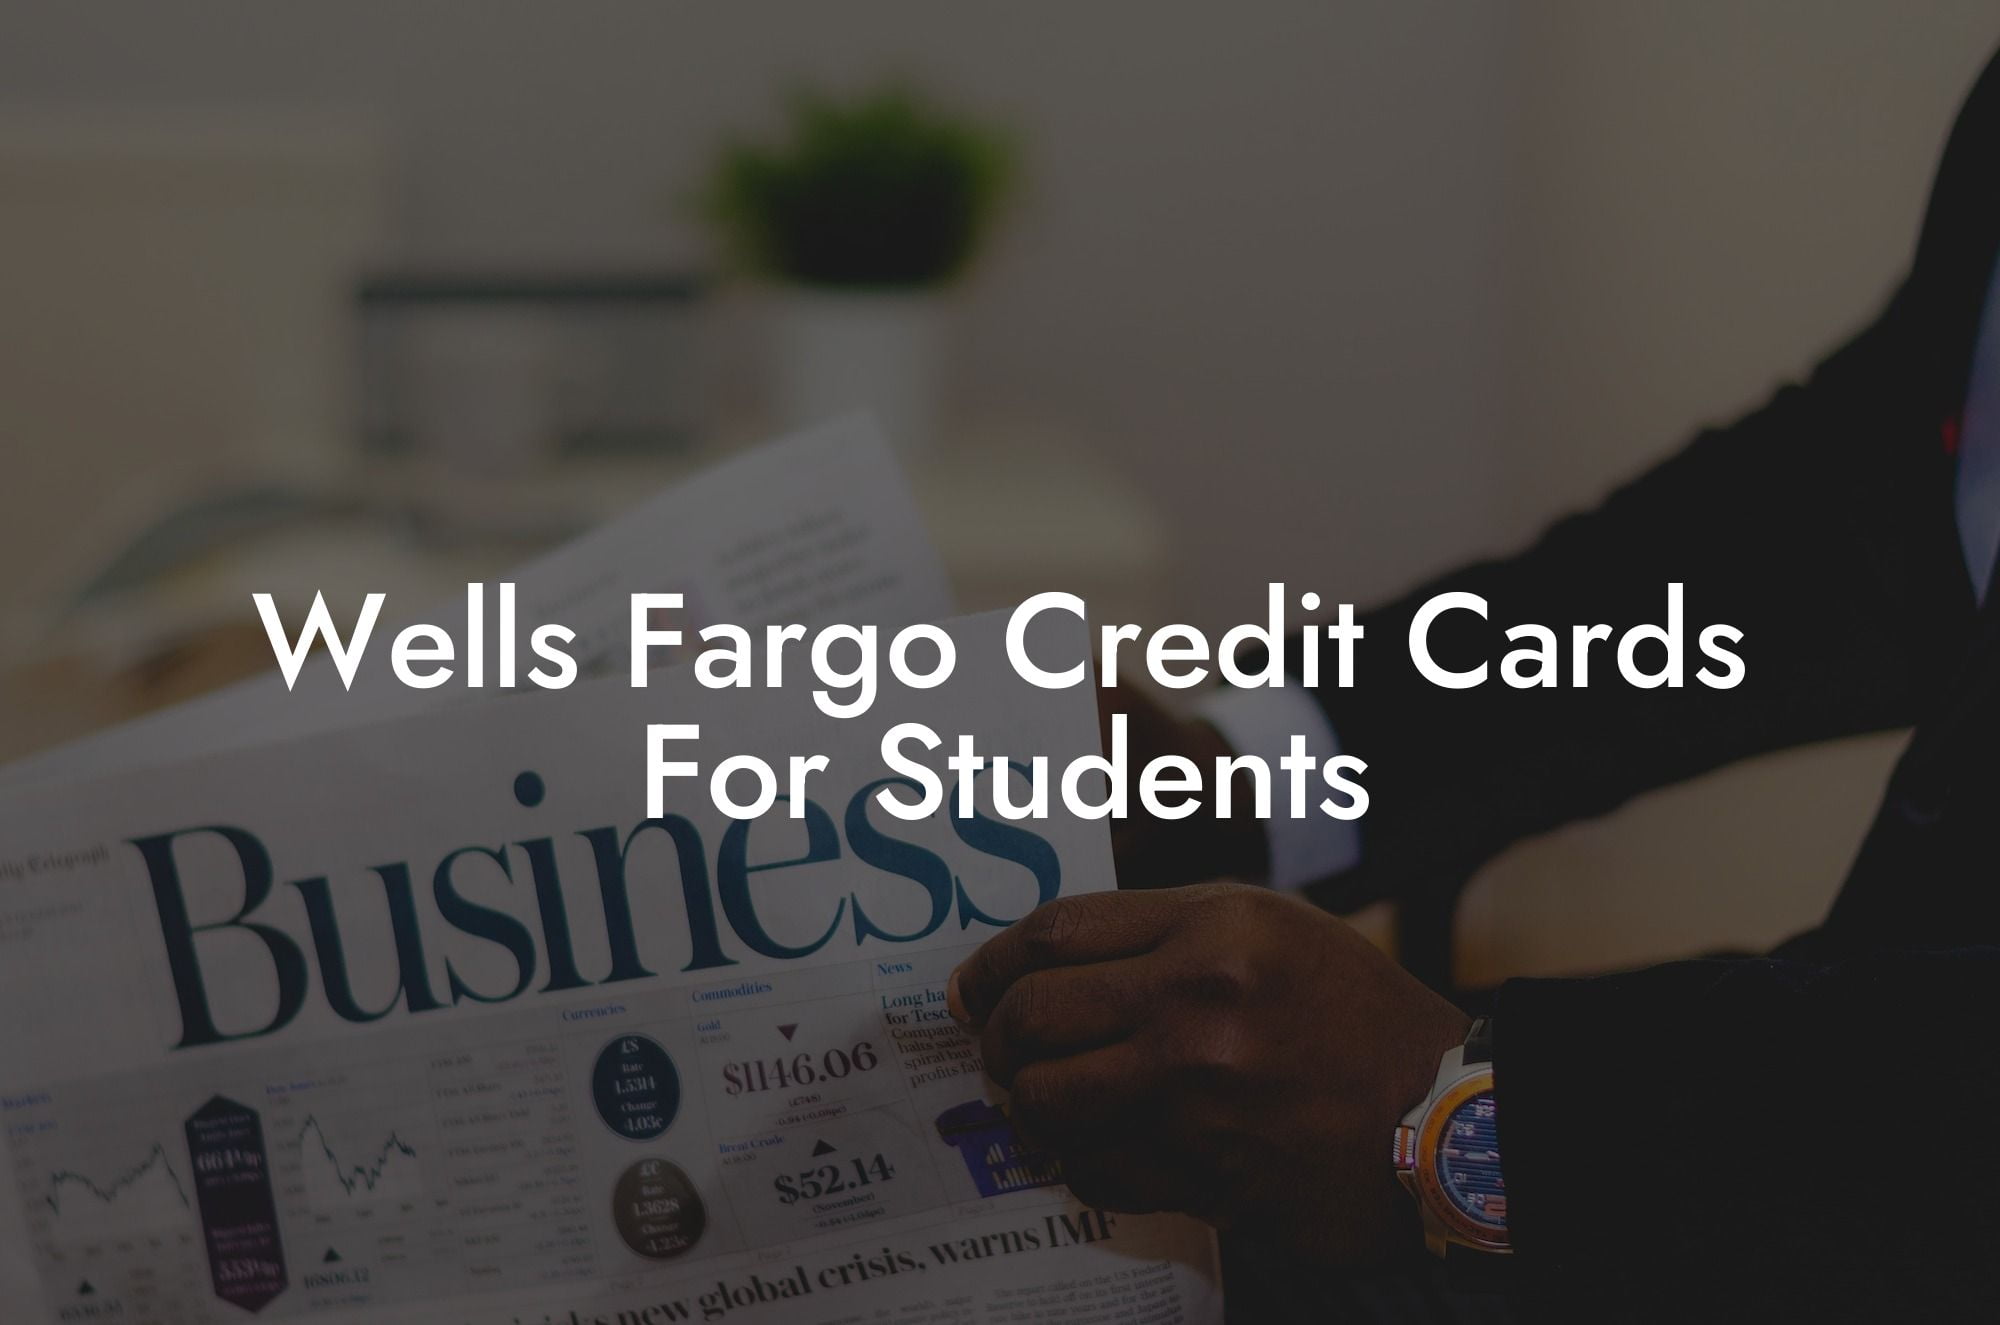 Wells Fargo Credit Cards For Students